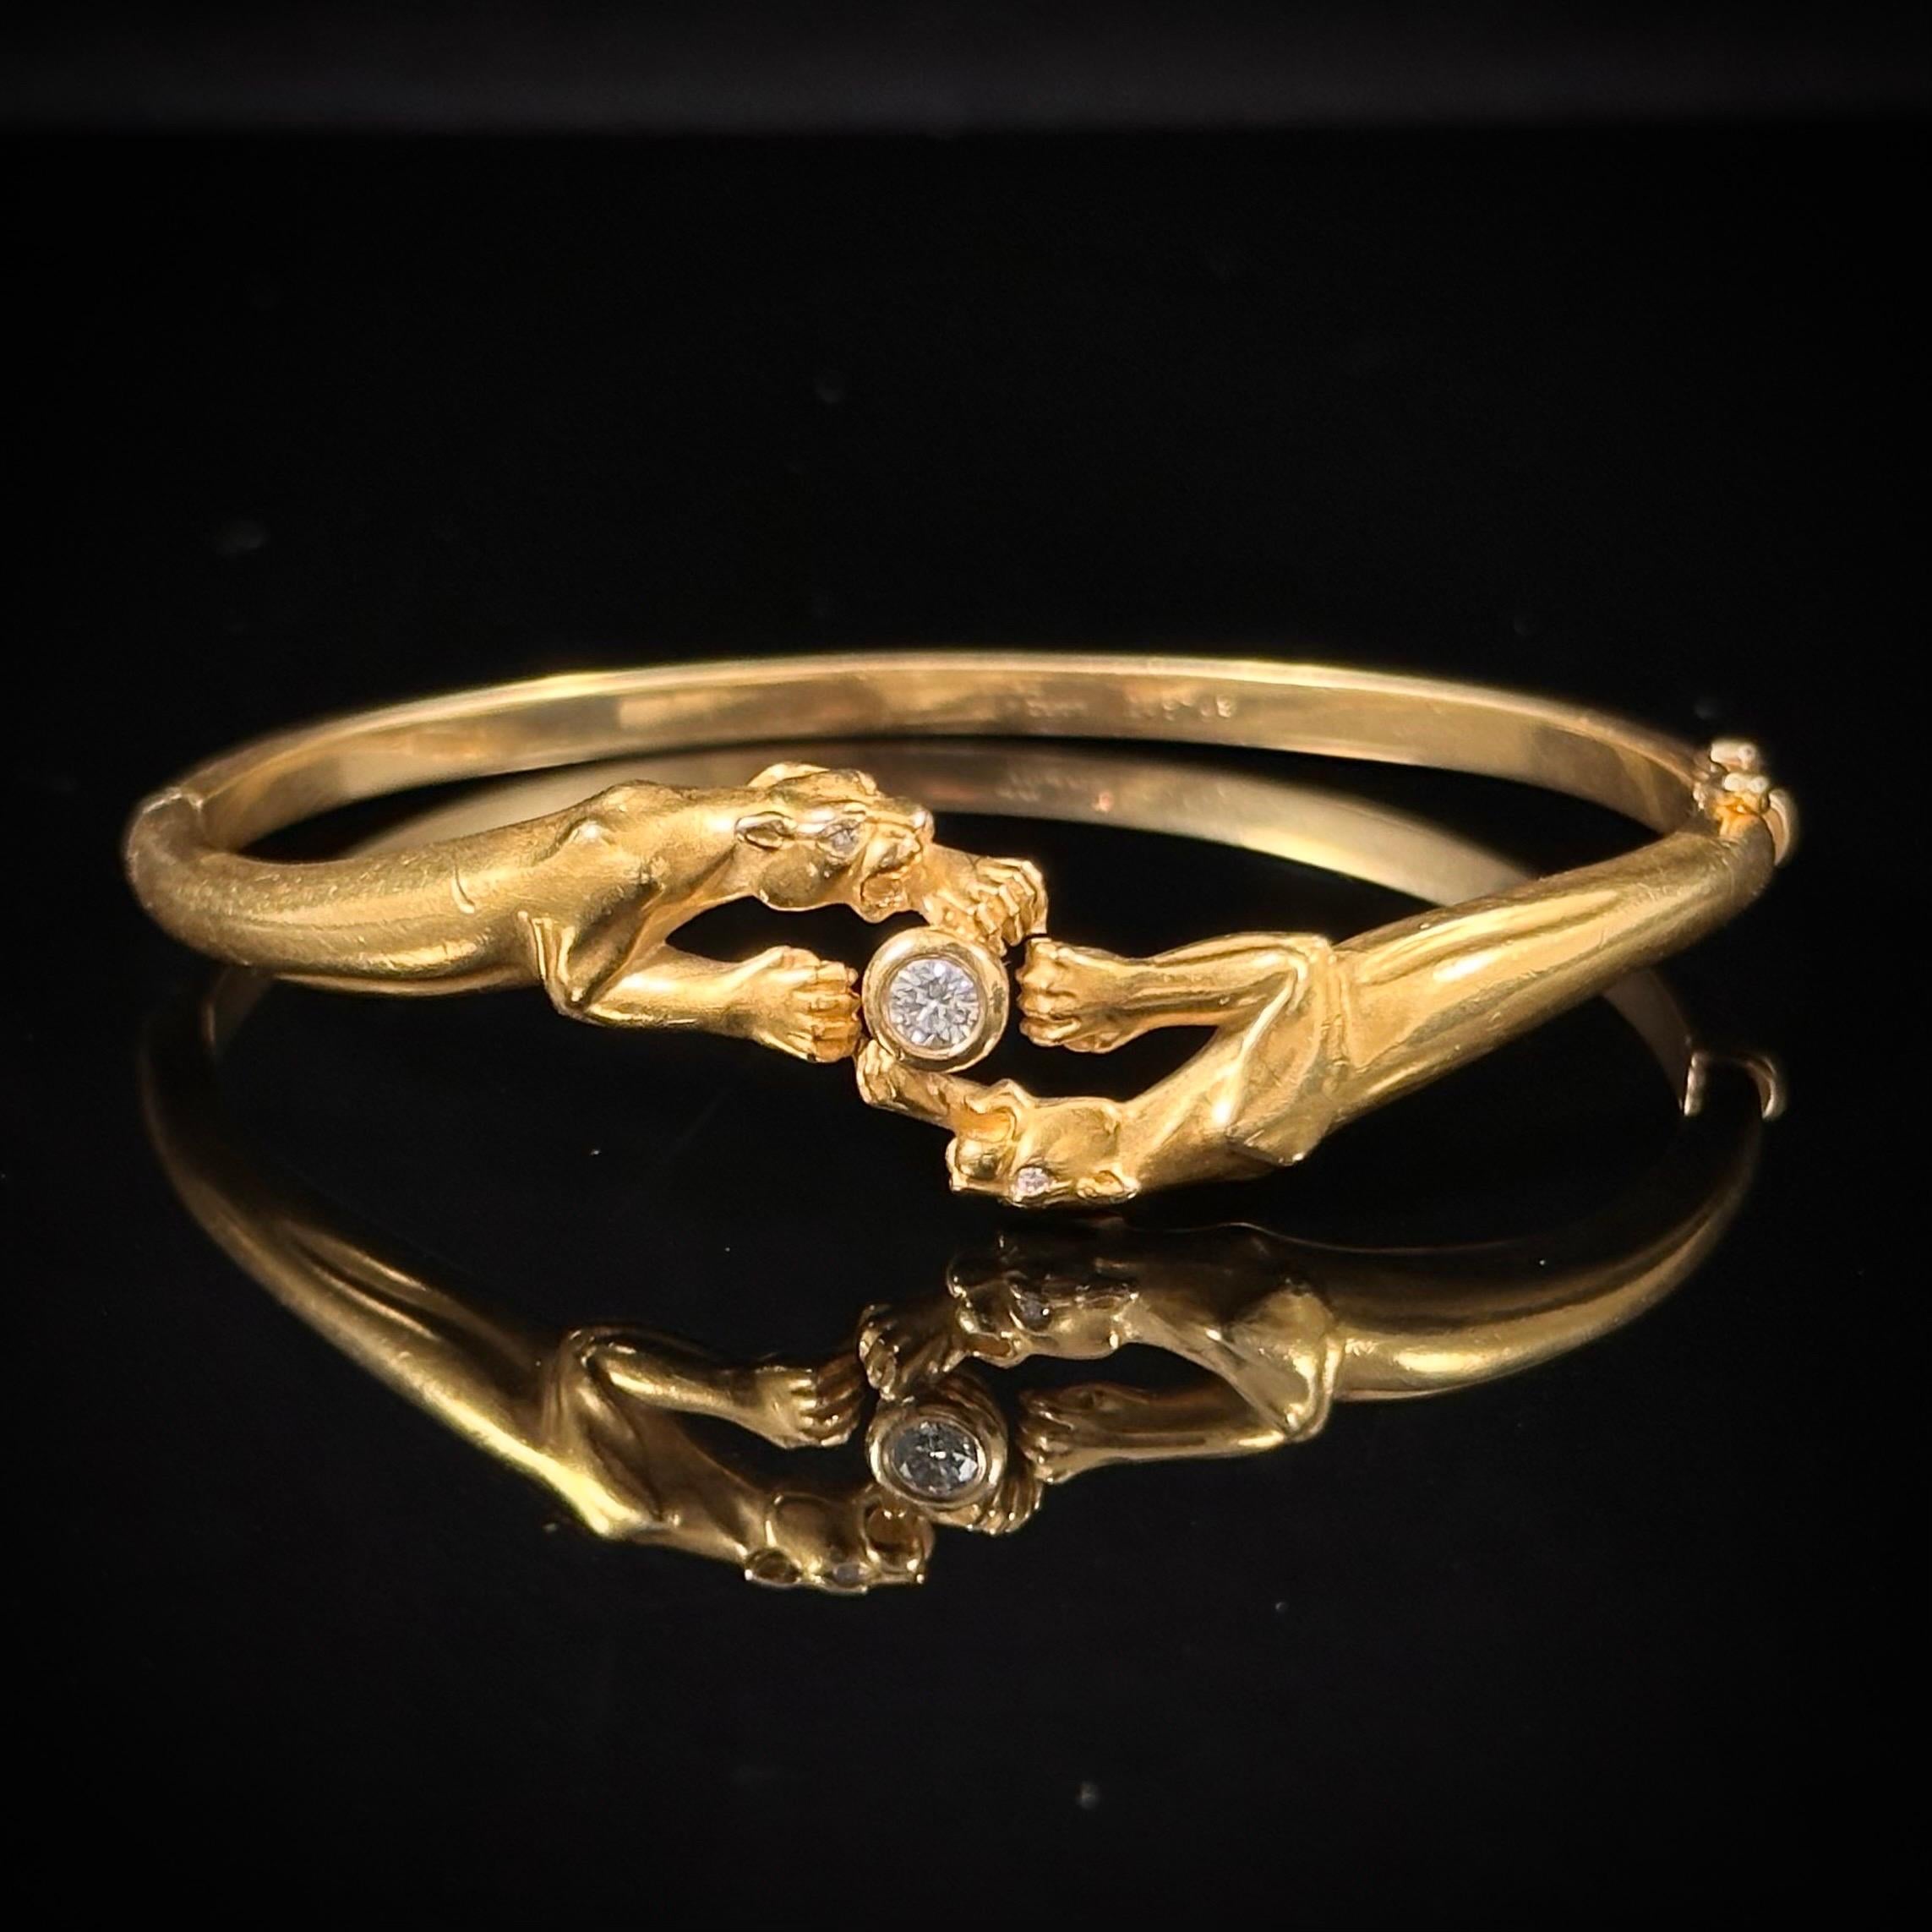 Carrera y Carrera vintage double panther diamond bangle bracelet in 18kt yellow gold, Spain, circa 1980s. This sleek and stylish bangle depicts two fierce panthers with sparkling diamond eyes fighting over a bezel-set round brilliant-cut diamond,